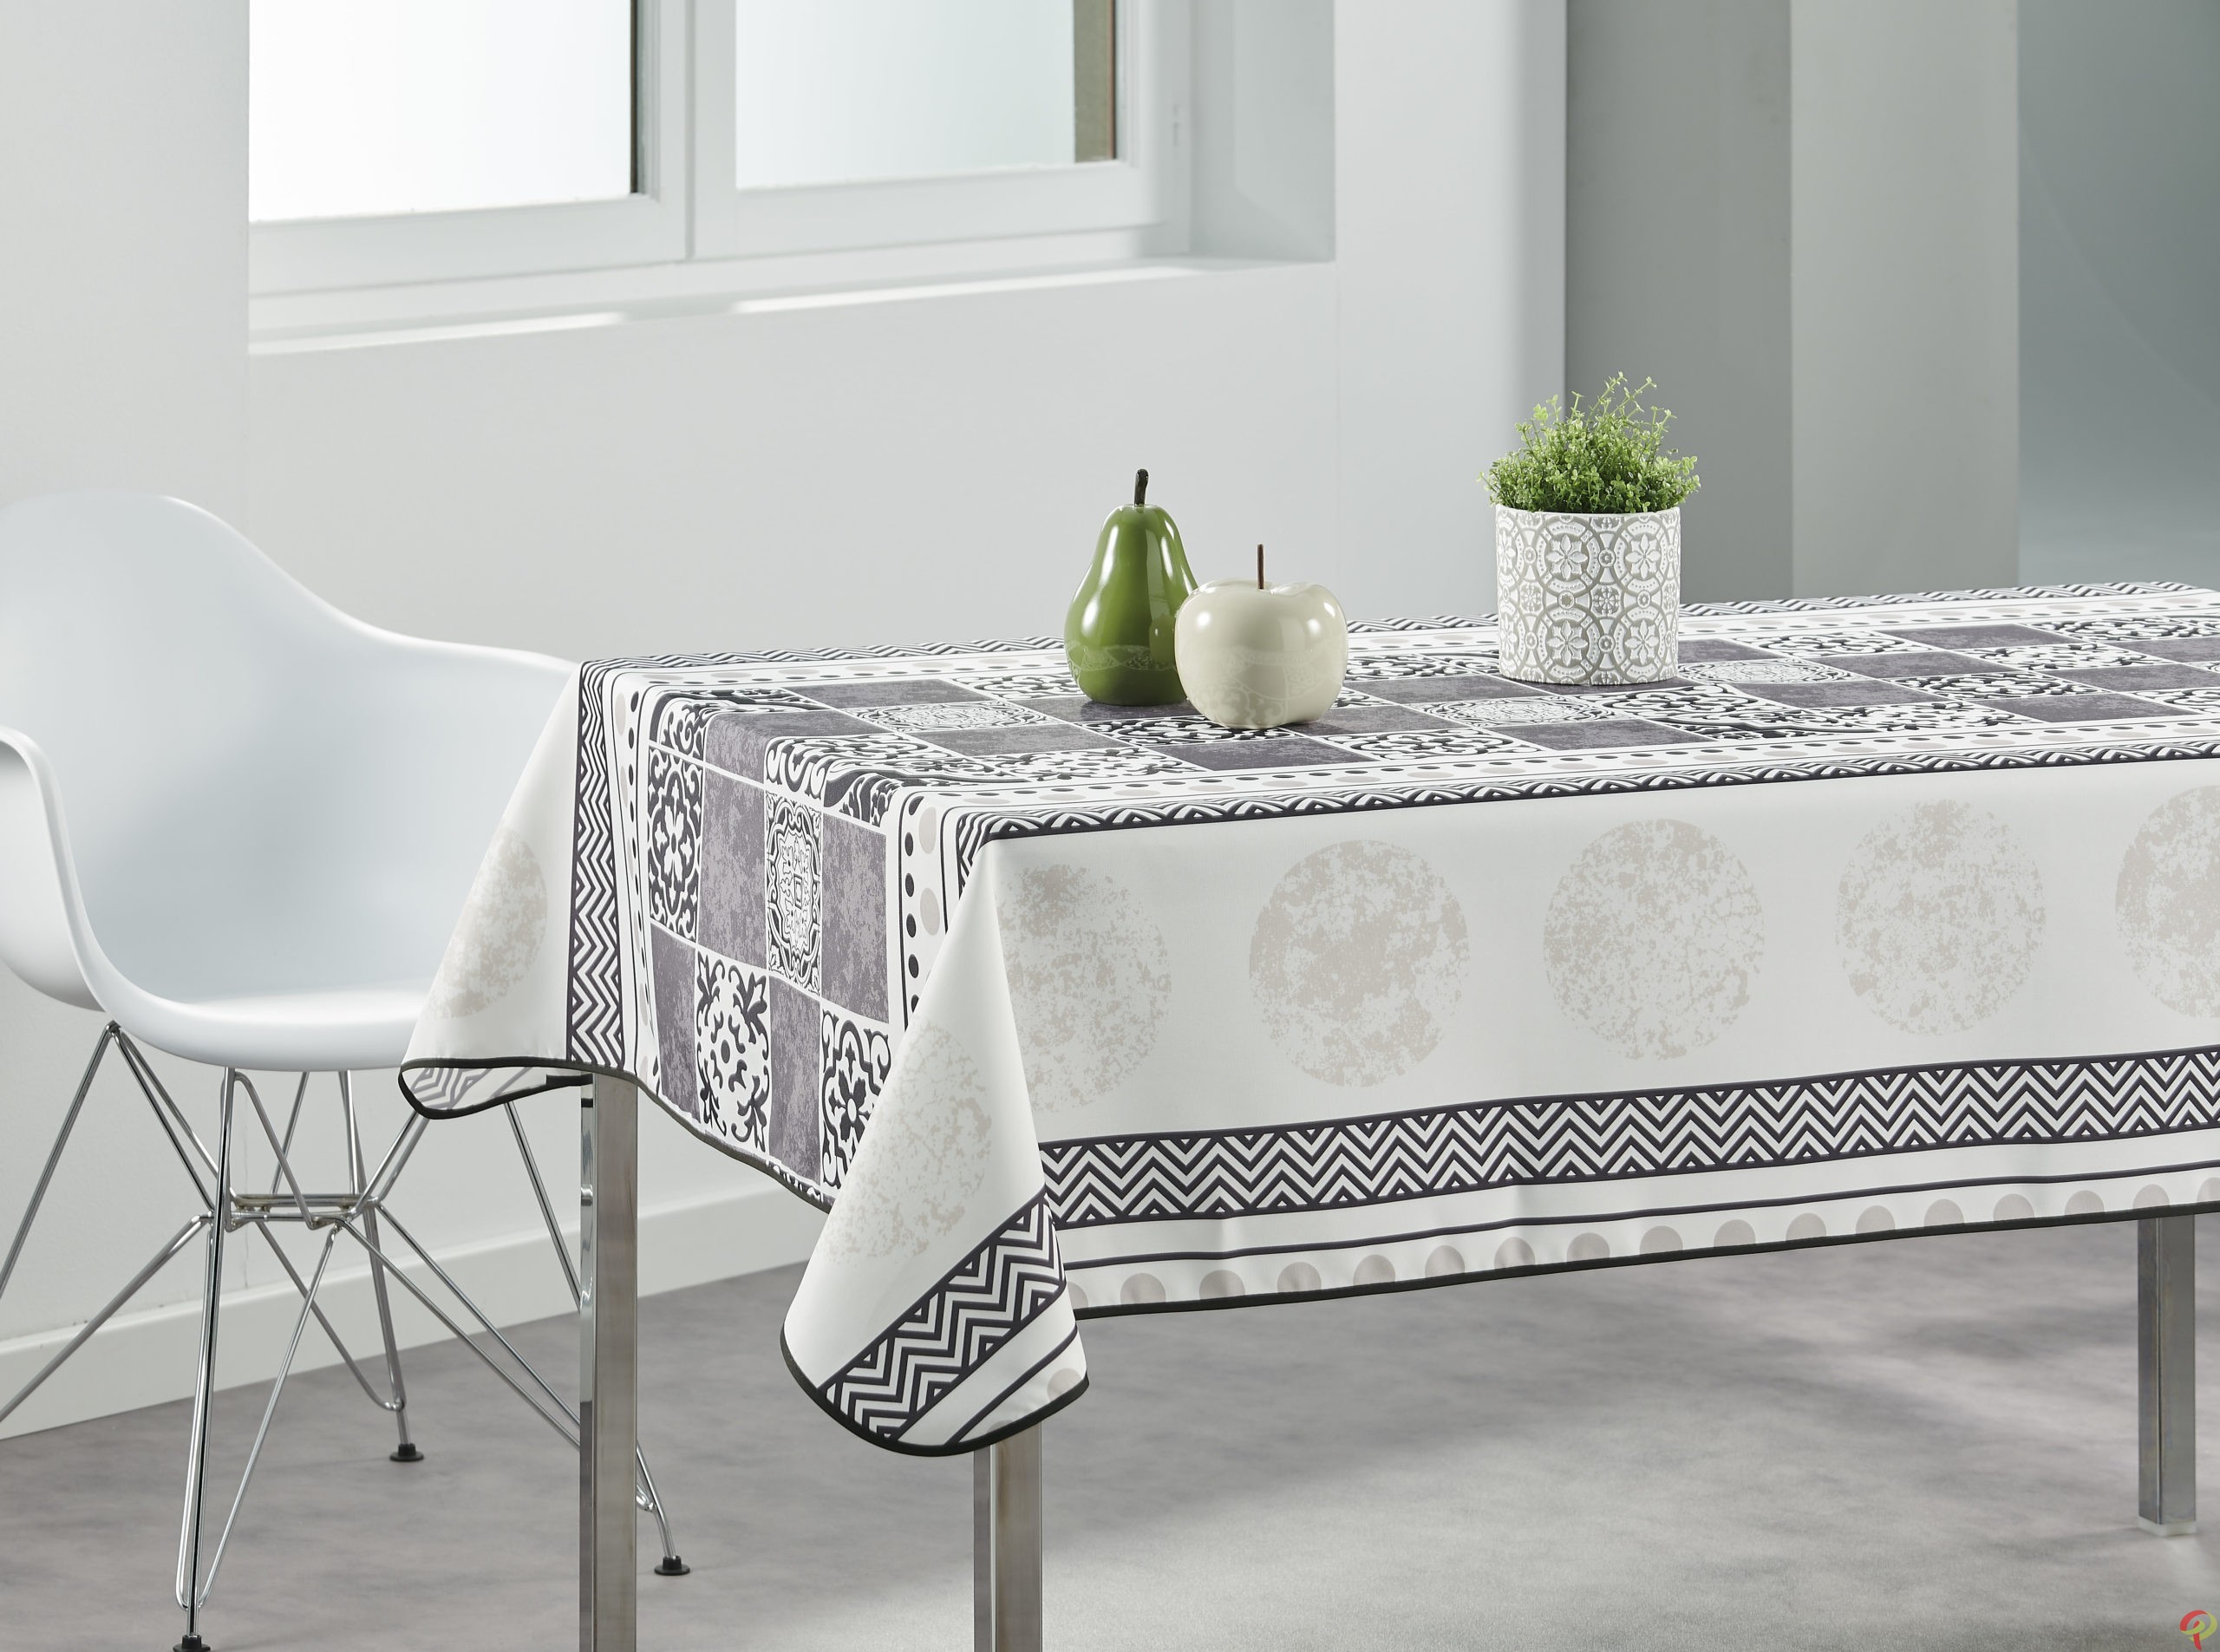 Nappe blanche rectangulaire polyester 300*200